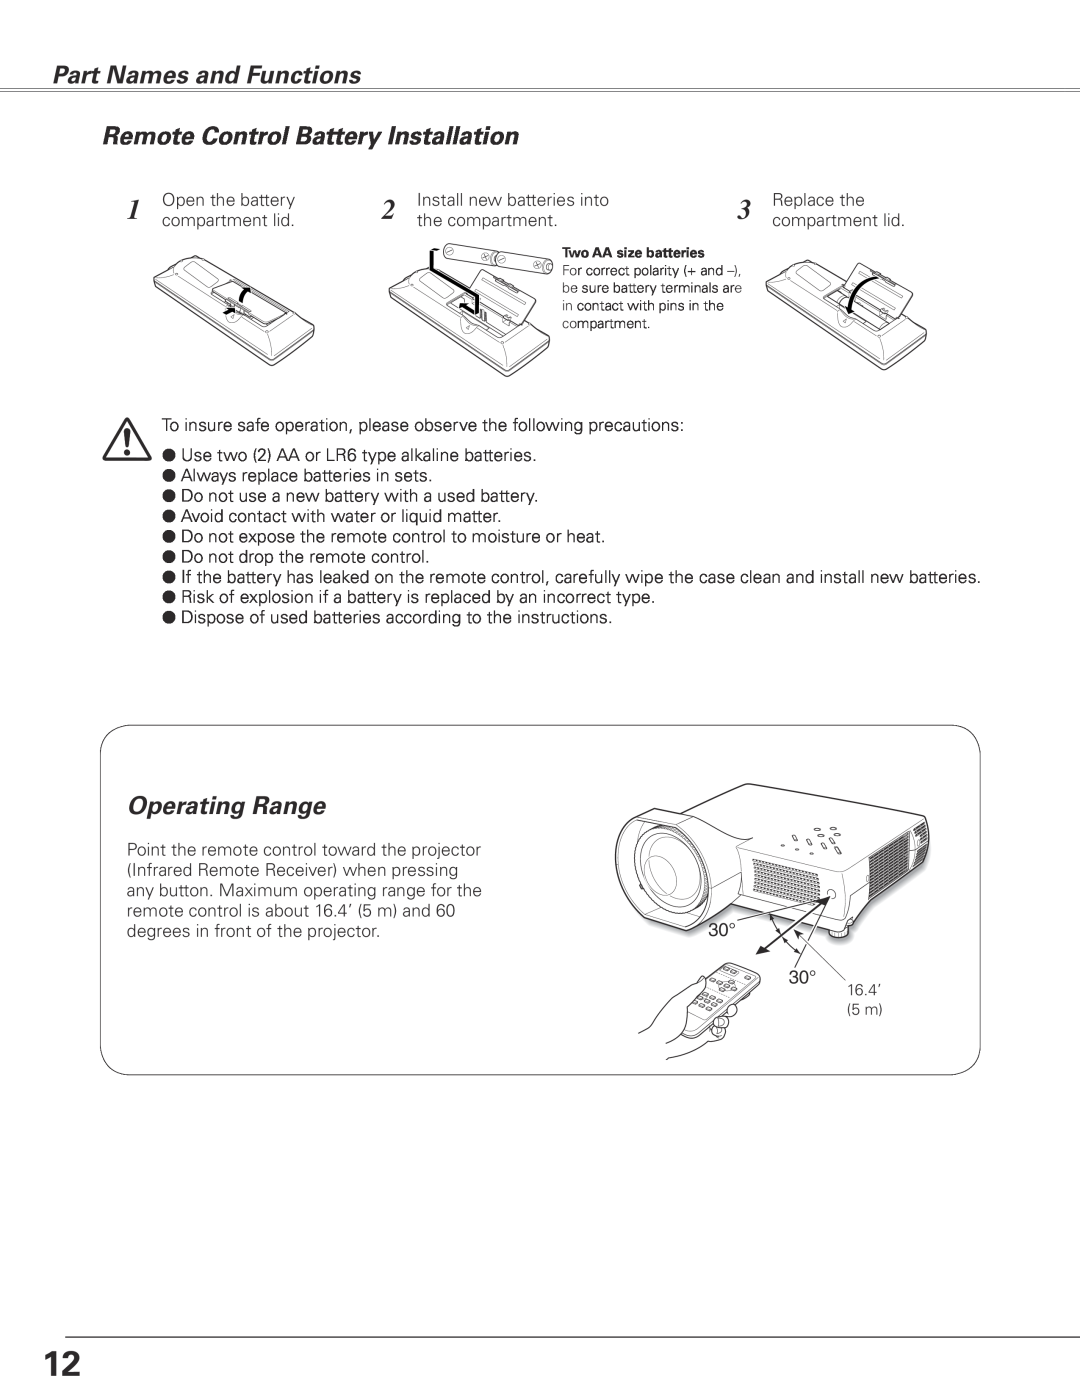 Sanyo PLC-XL45 owner manual Remote Control Battery Installation, Operating Range, Part Names and Functions 